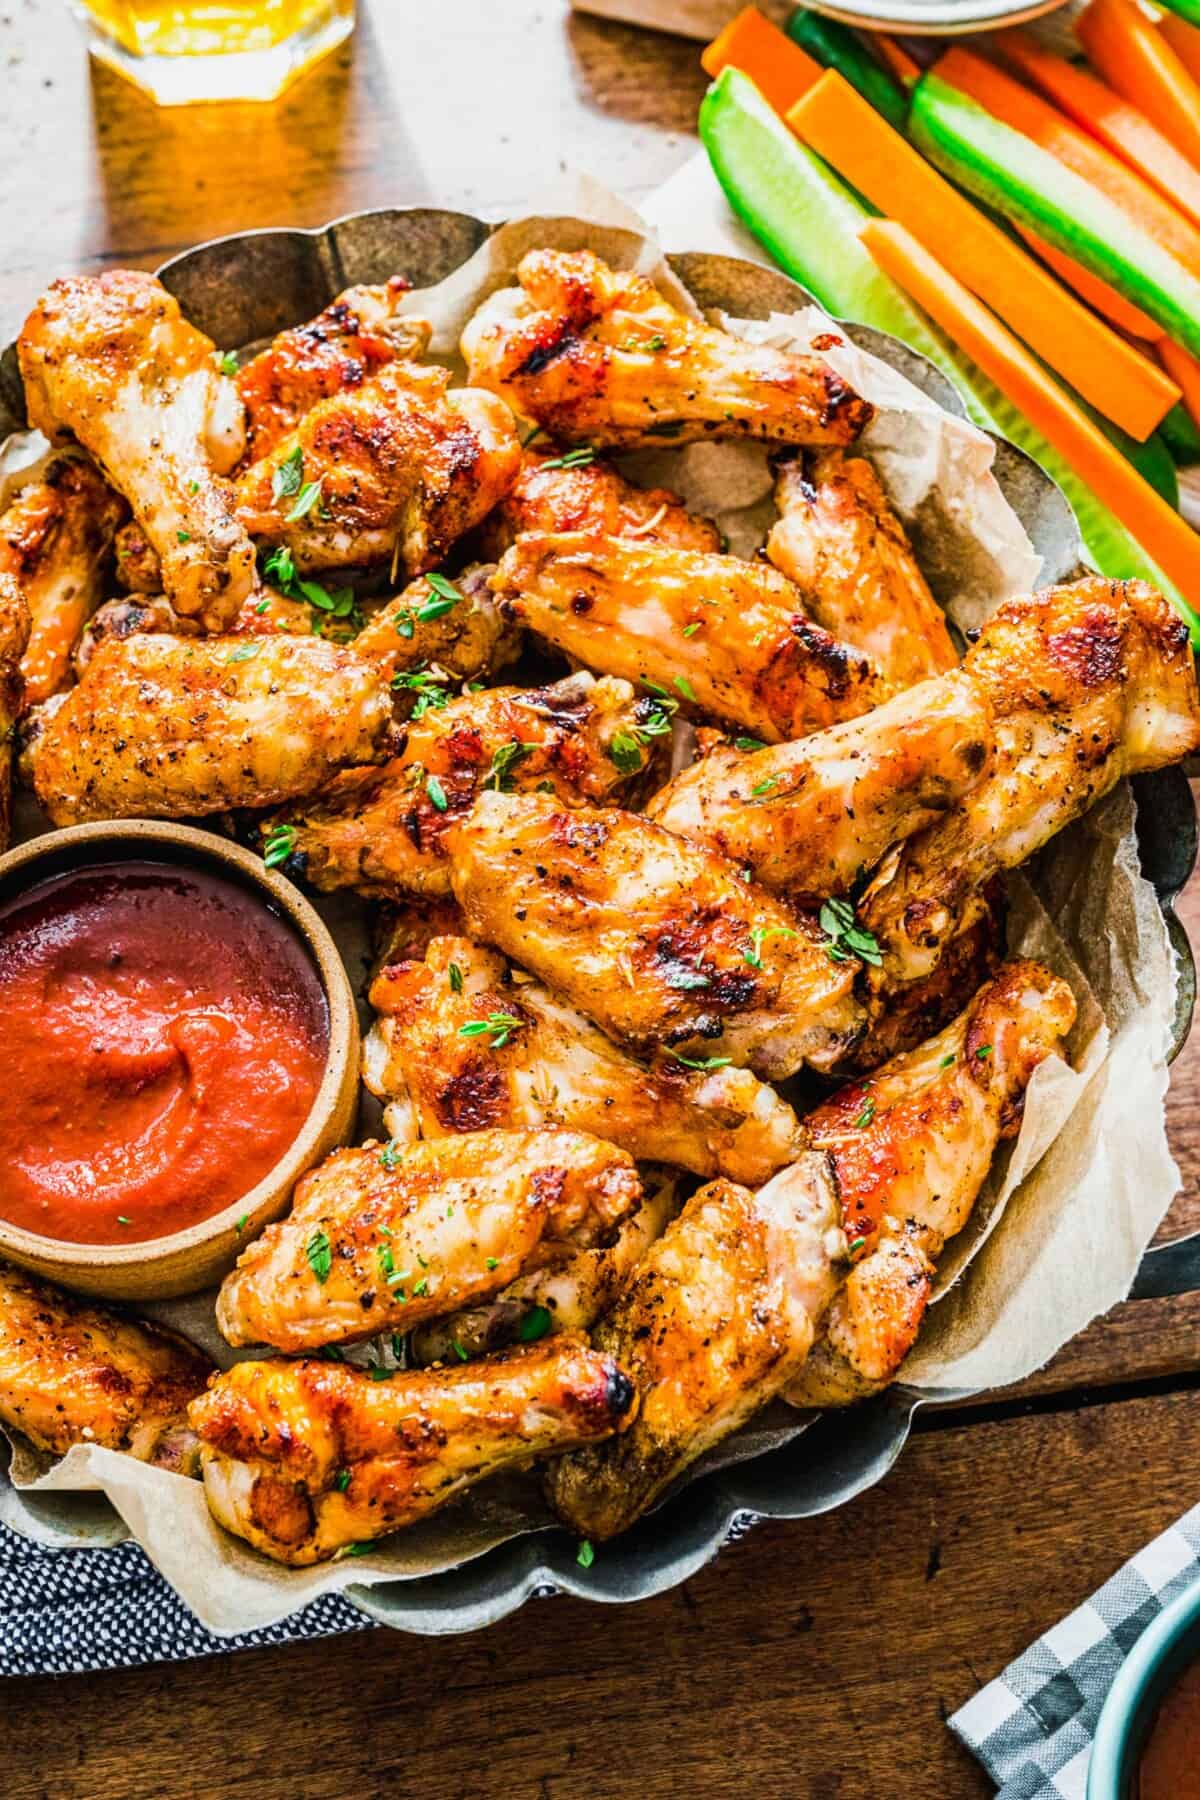 a large platter of grilled chicken wings next to a red sauce and sliced cucumbers and carrots